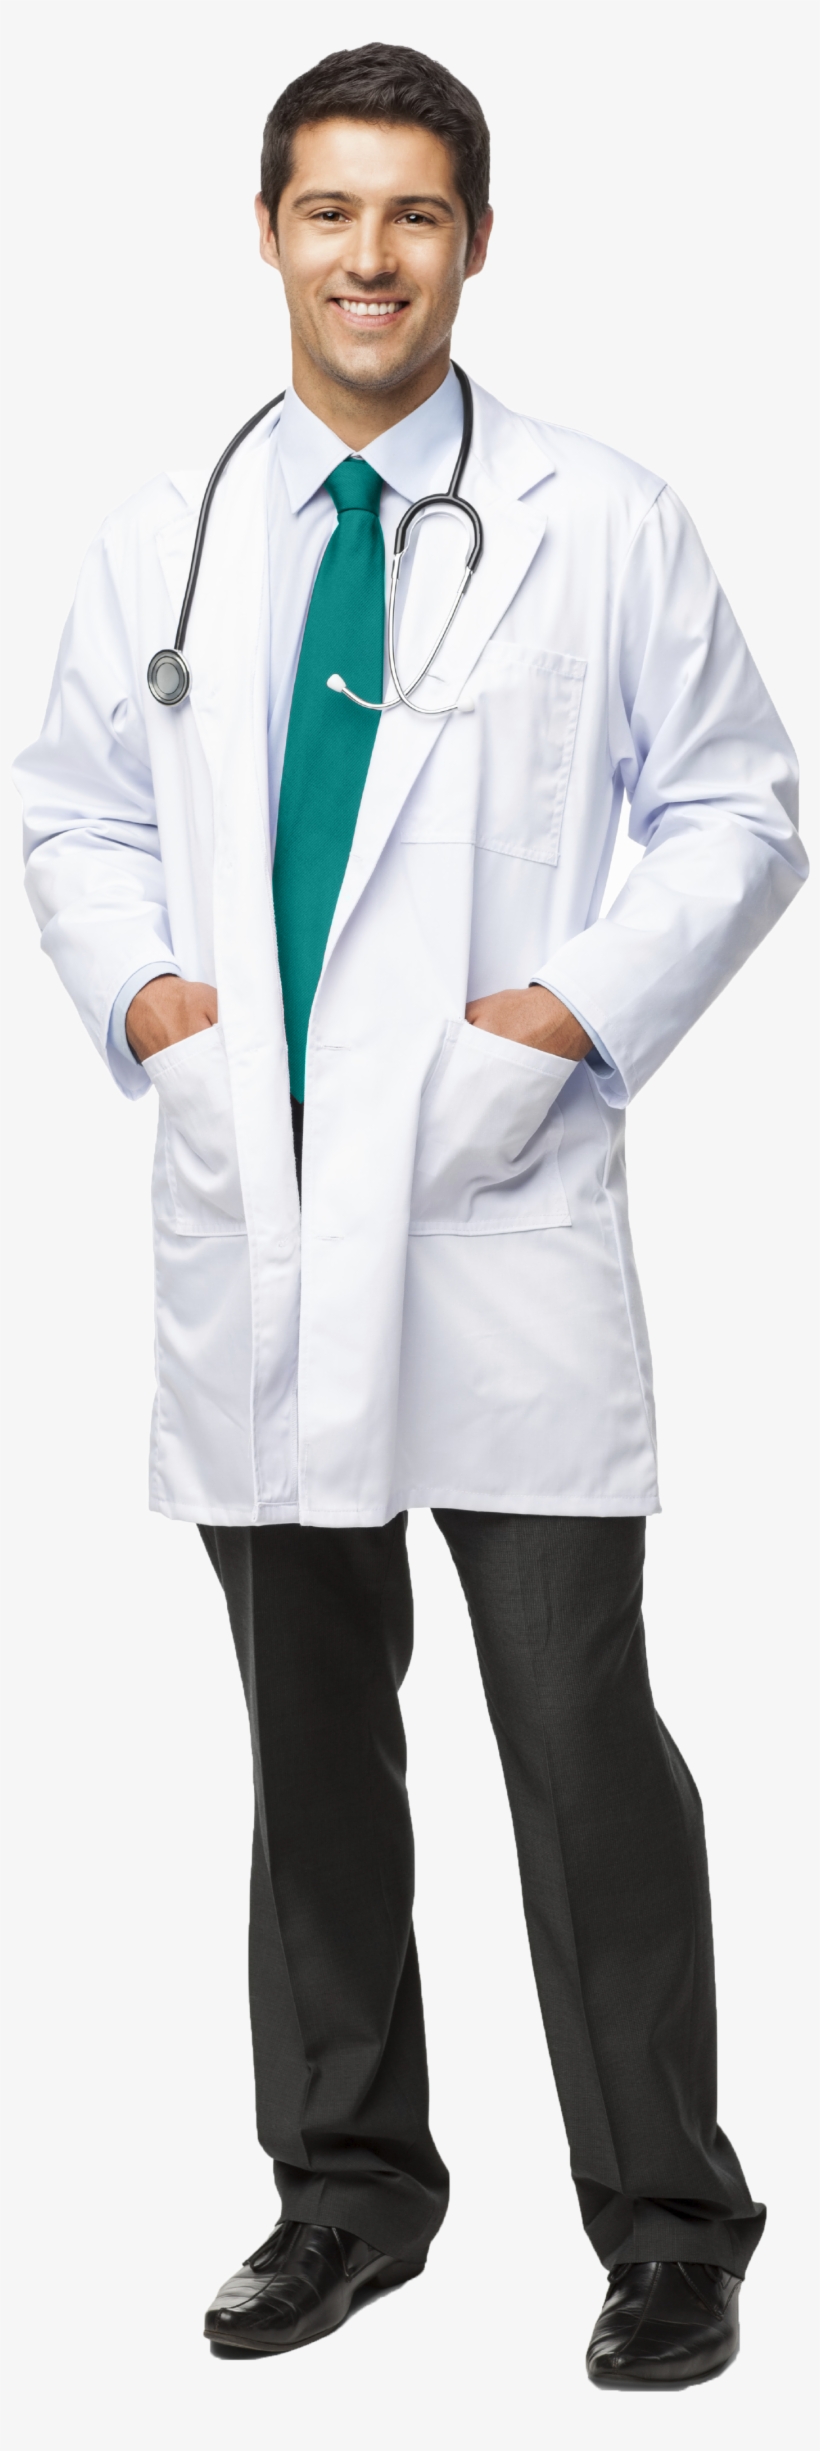 Patient Care Technician Program Orlando Fl - Doctor Isolated Png, transparent png #2820043